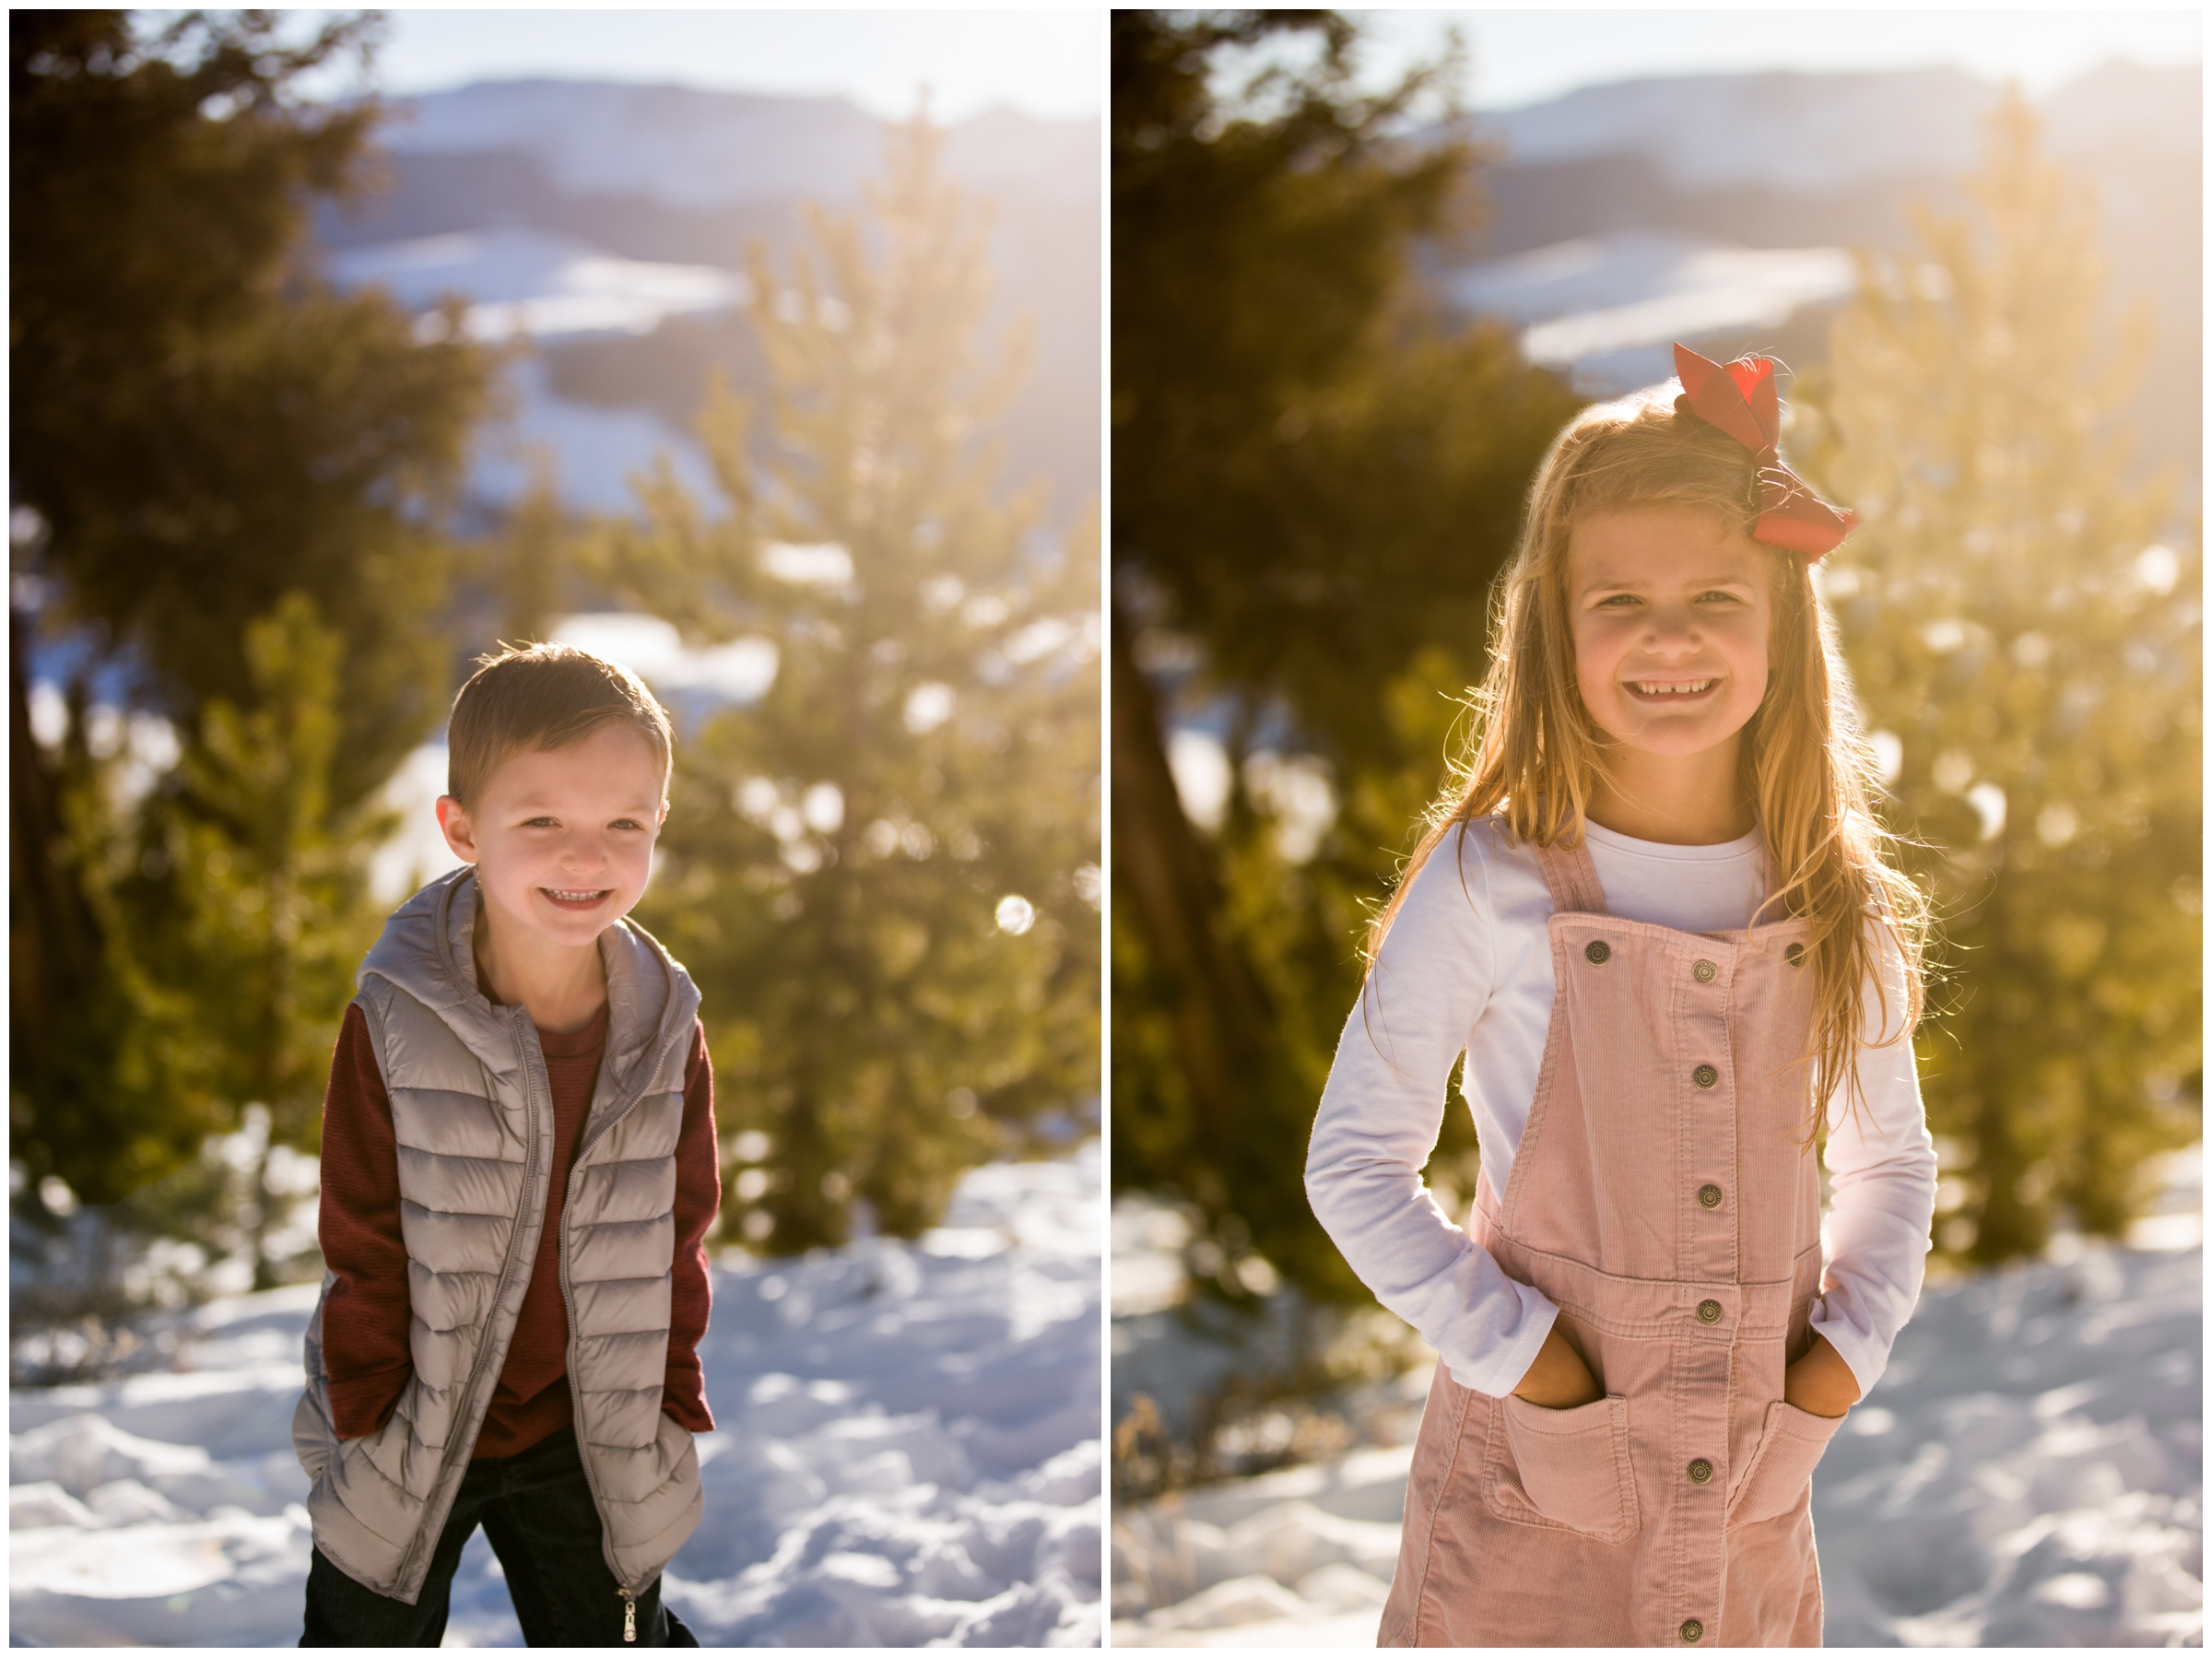 kids posing in the snow during winter family photography session in Colorado mountains 